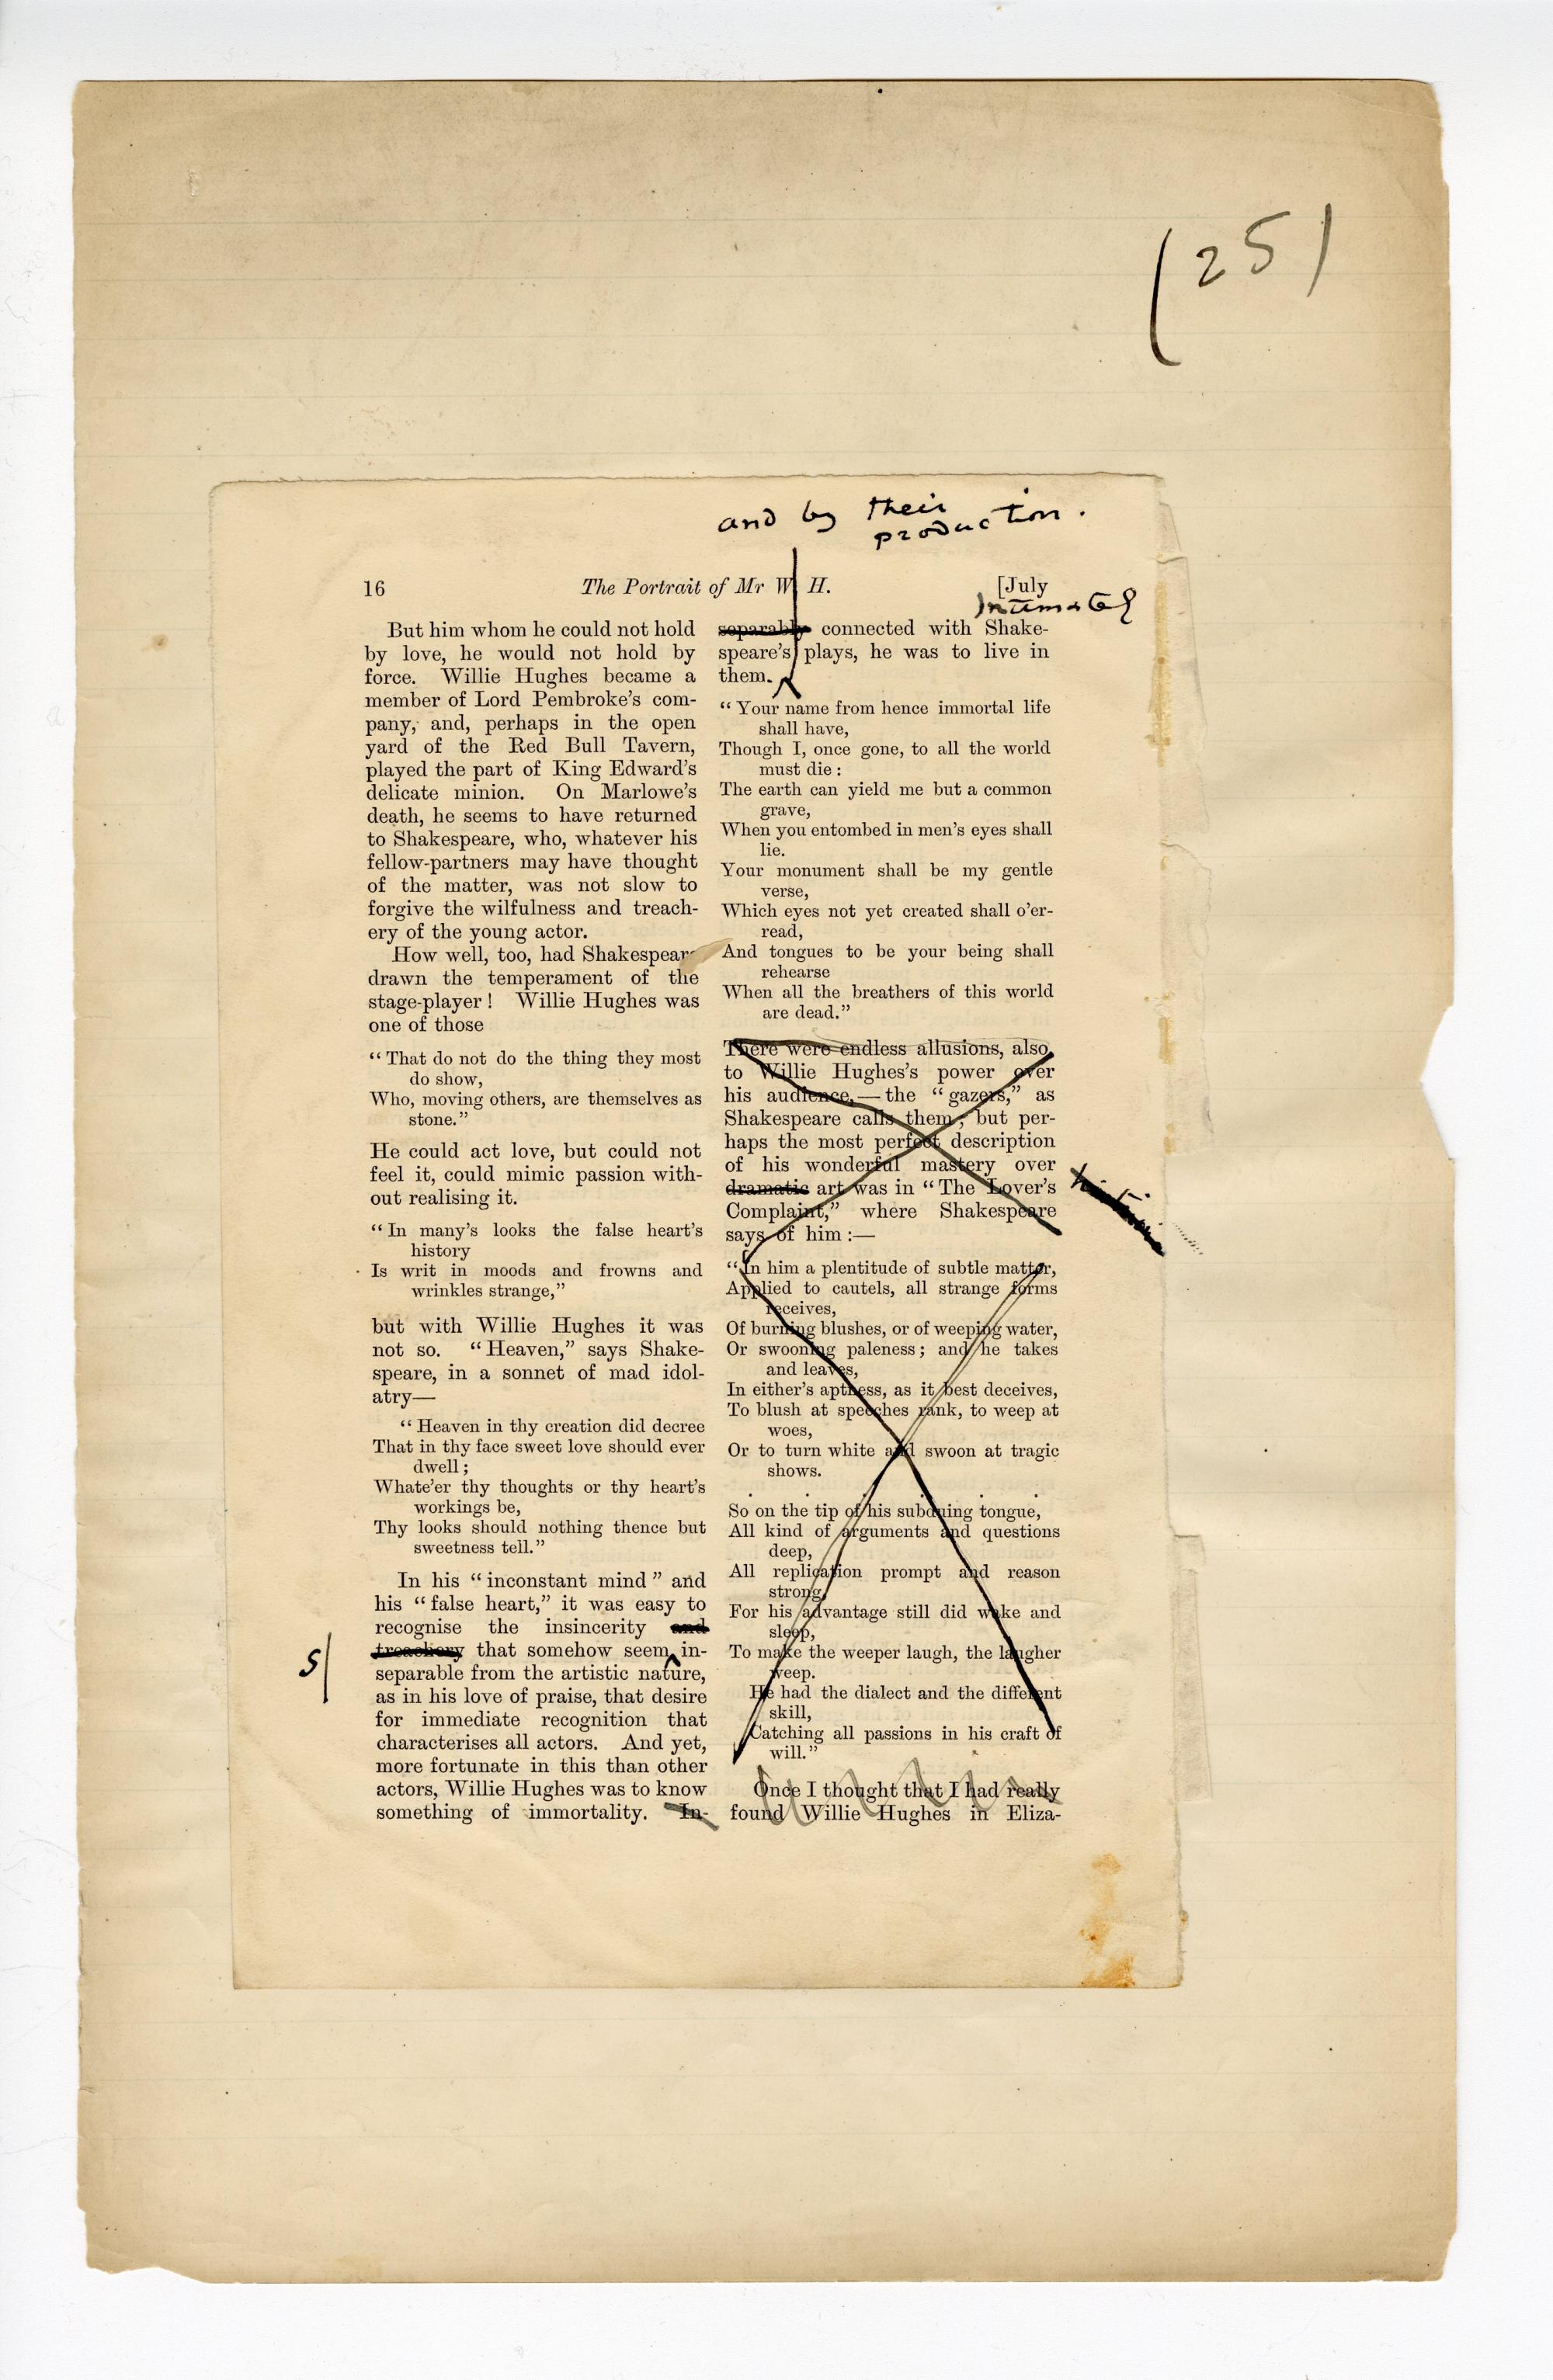 Folio 25 contains a full page (p. 16) from the Blackwood's 1889 printing glued down onto a notebook page. Wilde's annotations are on the Blackwood's page but not on the margins of the page except for the folio number.